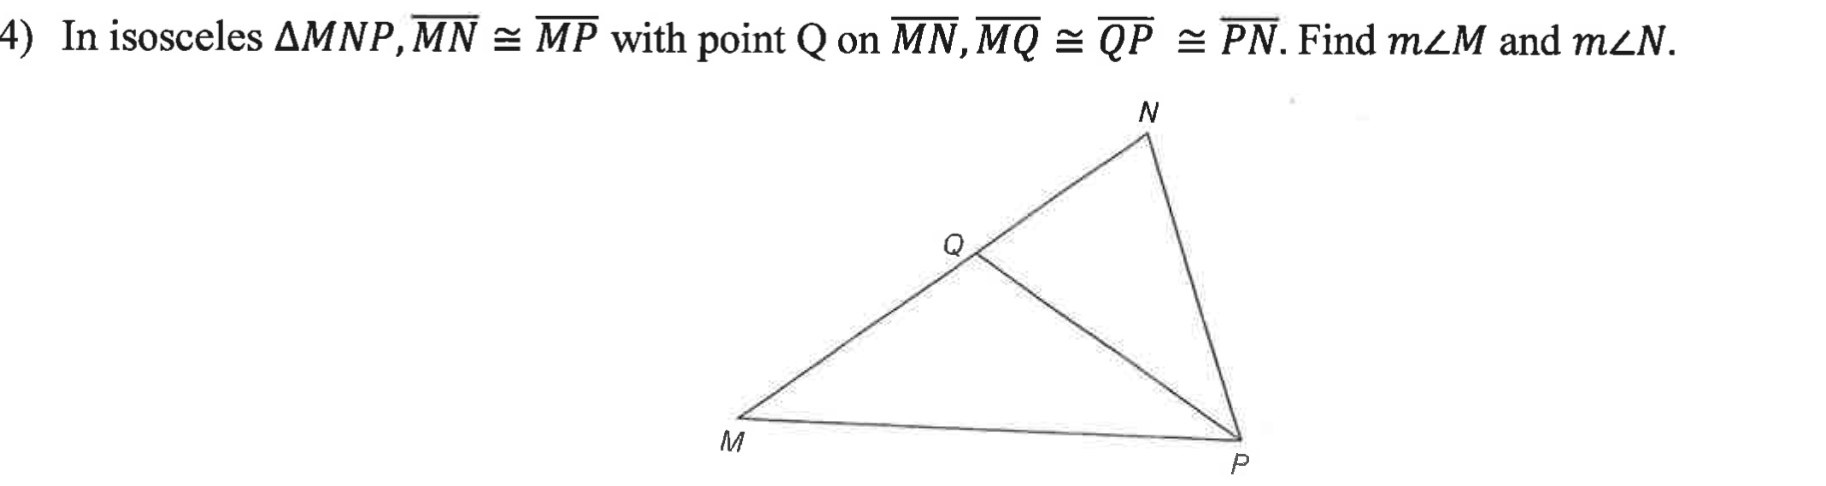 4) In isosceles AMNP,MN = MP with point Q on MN, MQ = QP = PN. Find mzM and m<N.
